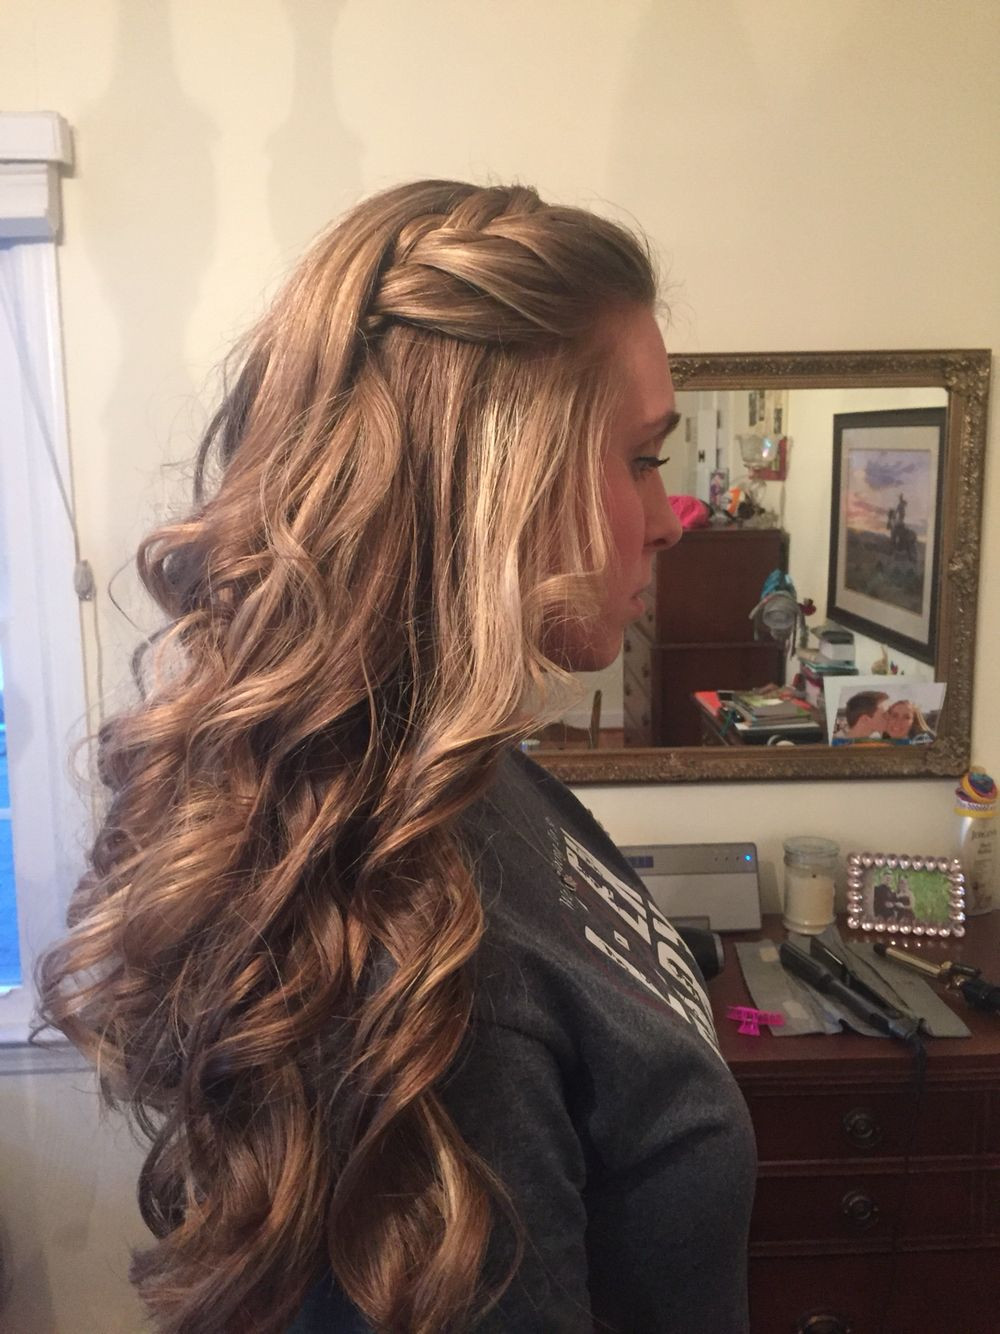 Loose Curl Prom Hairstyles
 Loose curls with a braid by me Hair design